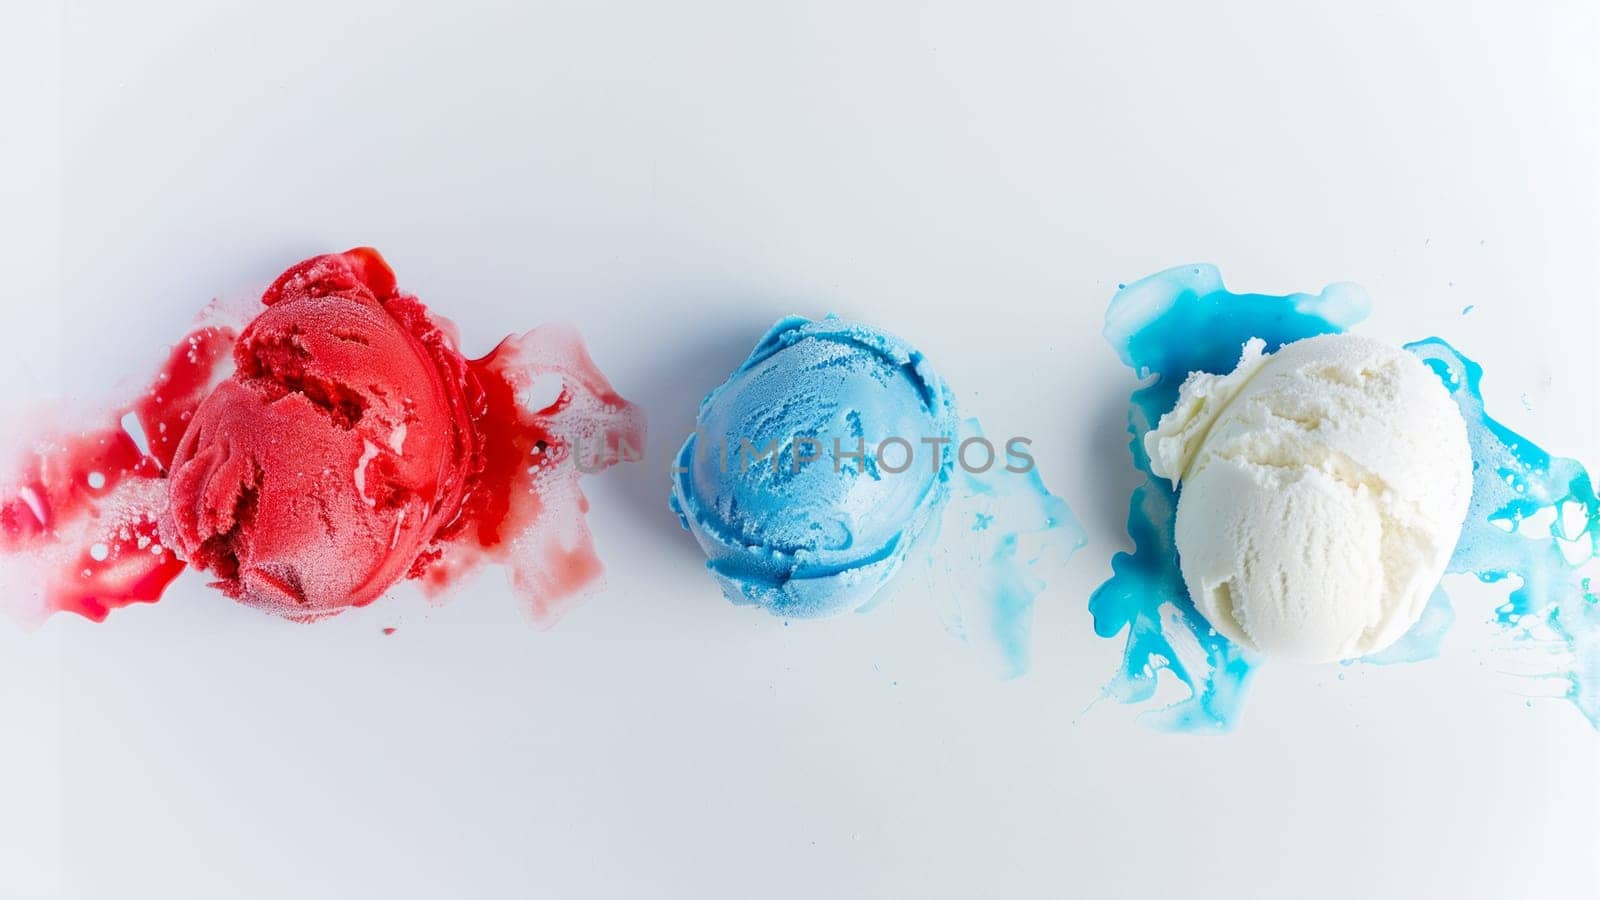 Top view of red, white, blue ice cream balls on white background